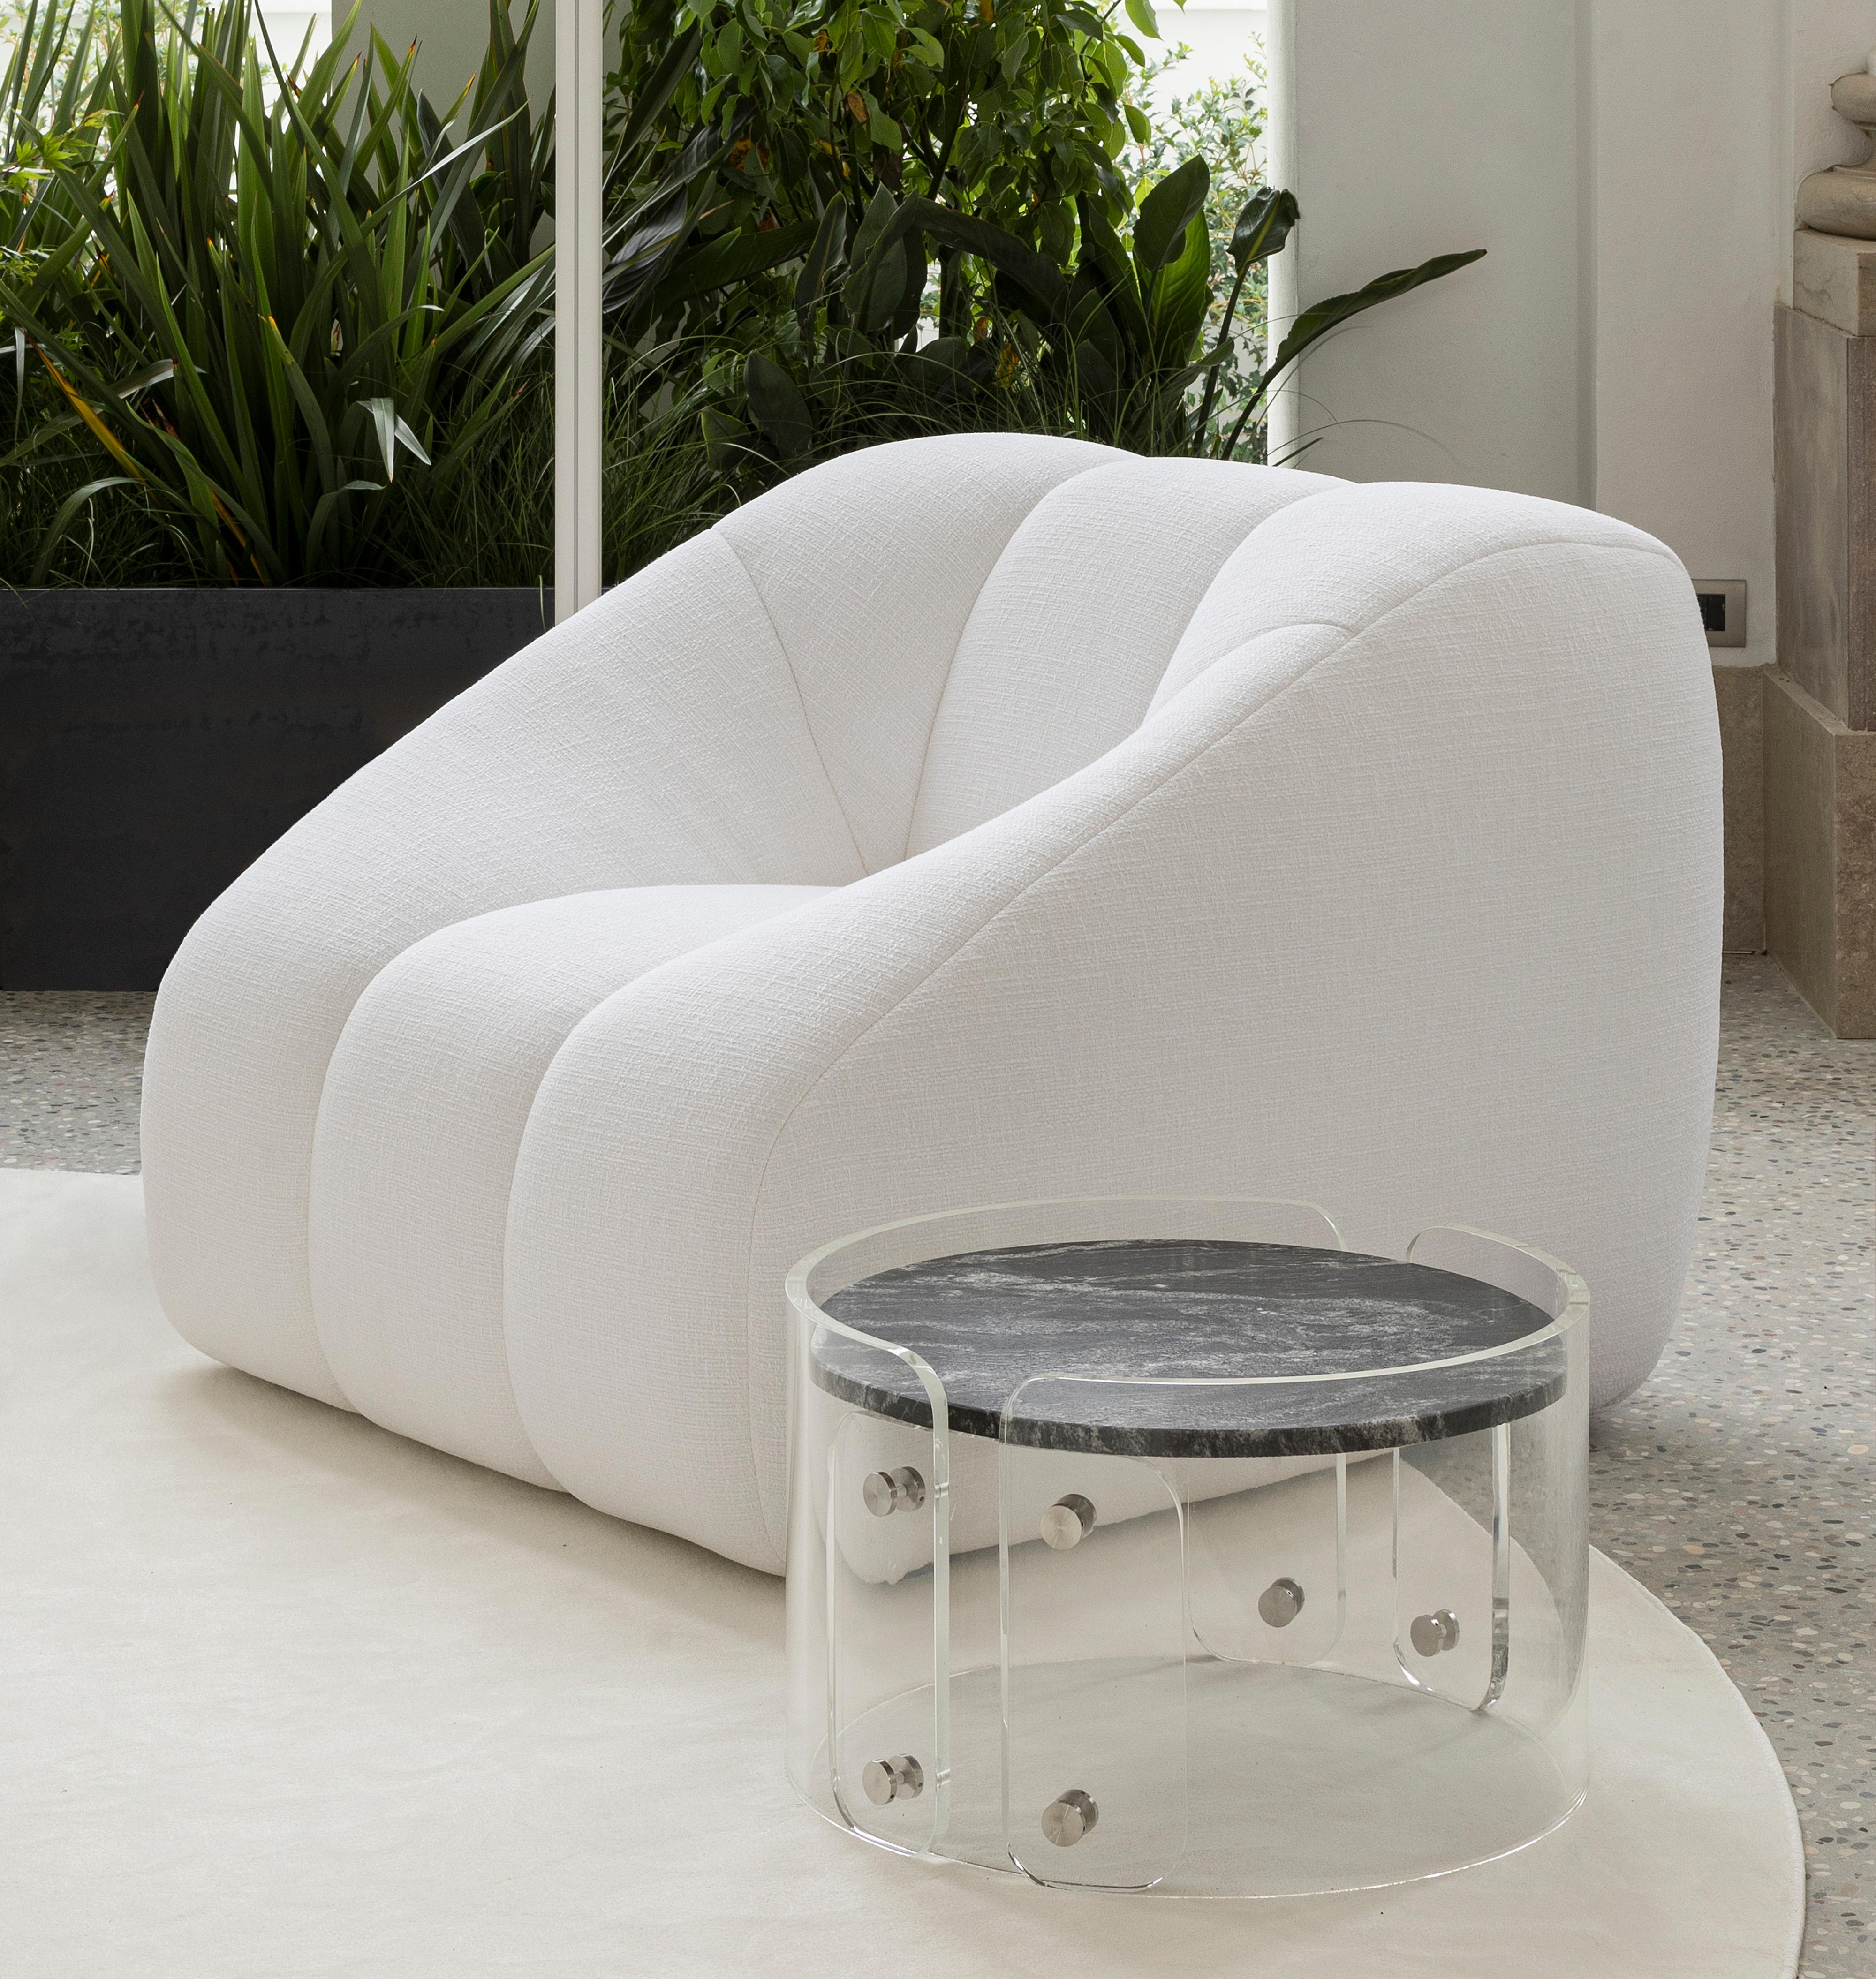 Created by Brazilian designer Ricardo Antonio, the Lassù coffee table stands out for the simplicity with which it combines two very different materials: stone and plexiglass. The top is made of black beauty granite, a rich material whose shades in